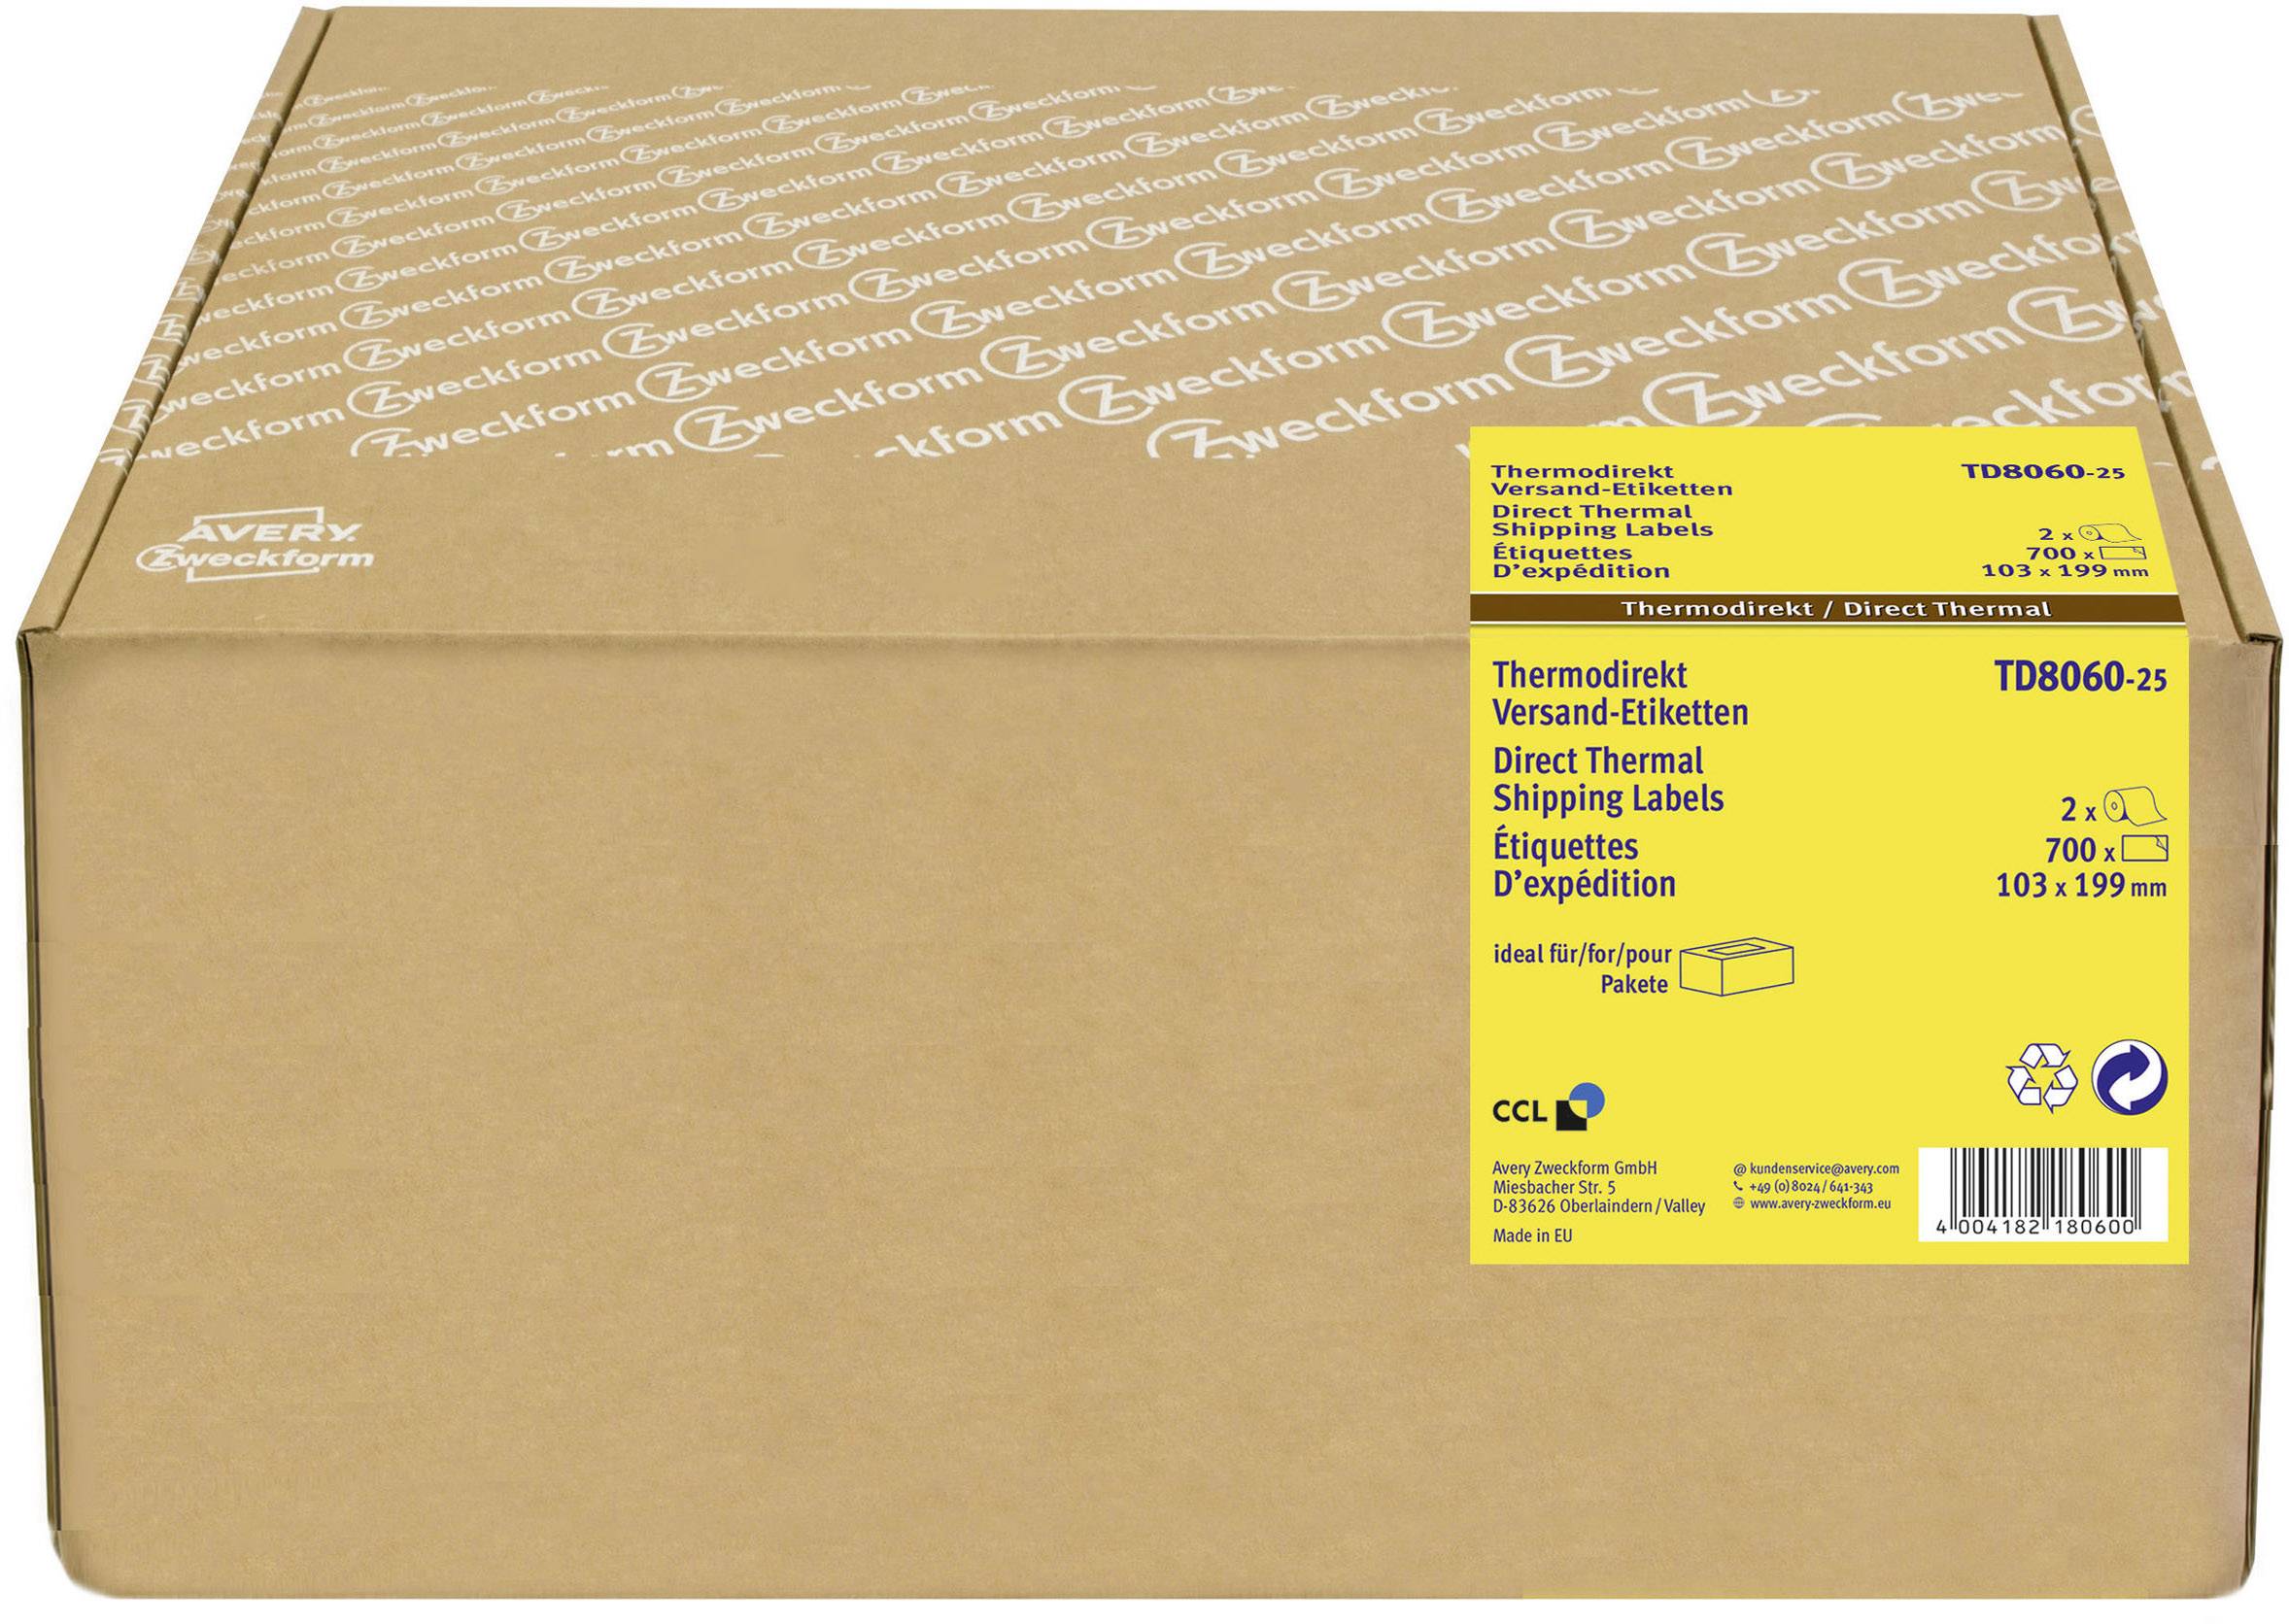 Avery-Zweckform Label roll 26 x 26 mm Direct thermal transfer paper White  26 pc(s) Permanent TD26-26 Shipping label